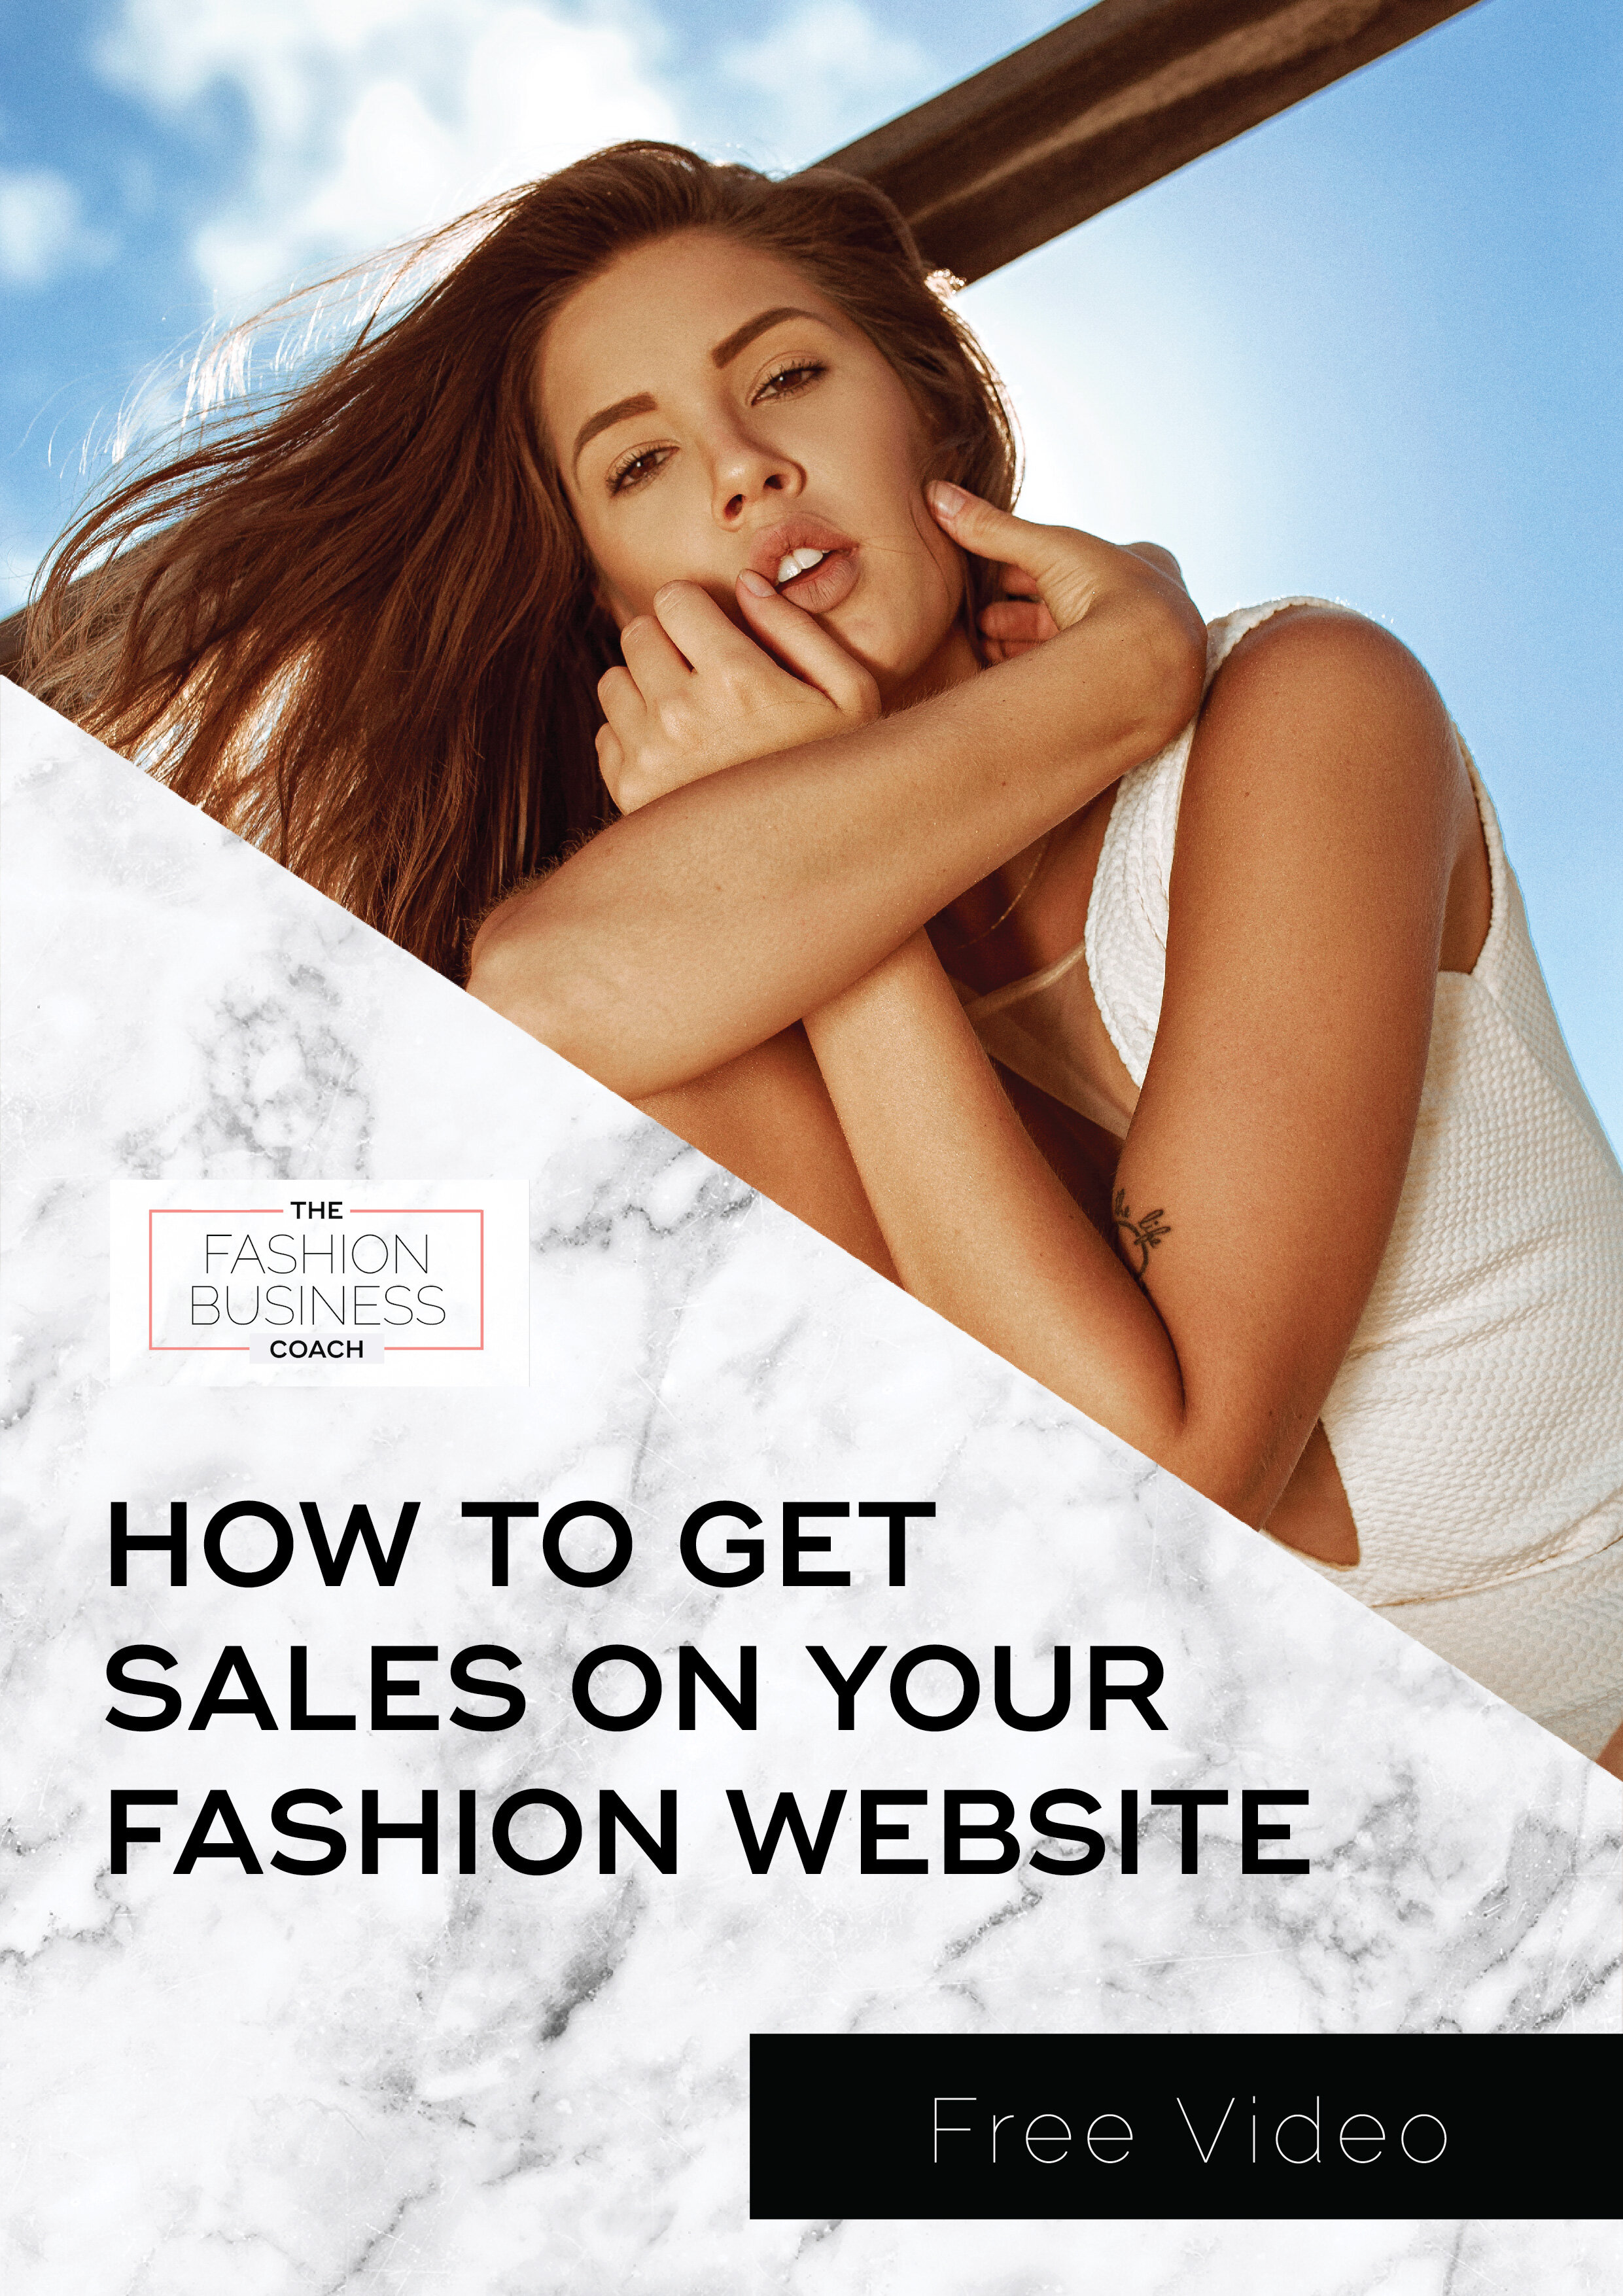 How to Get Sales on Your Fashion Website2.jpg